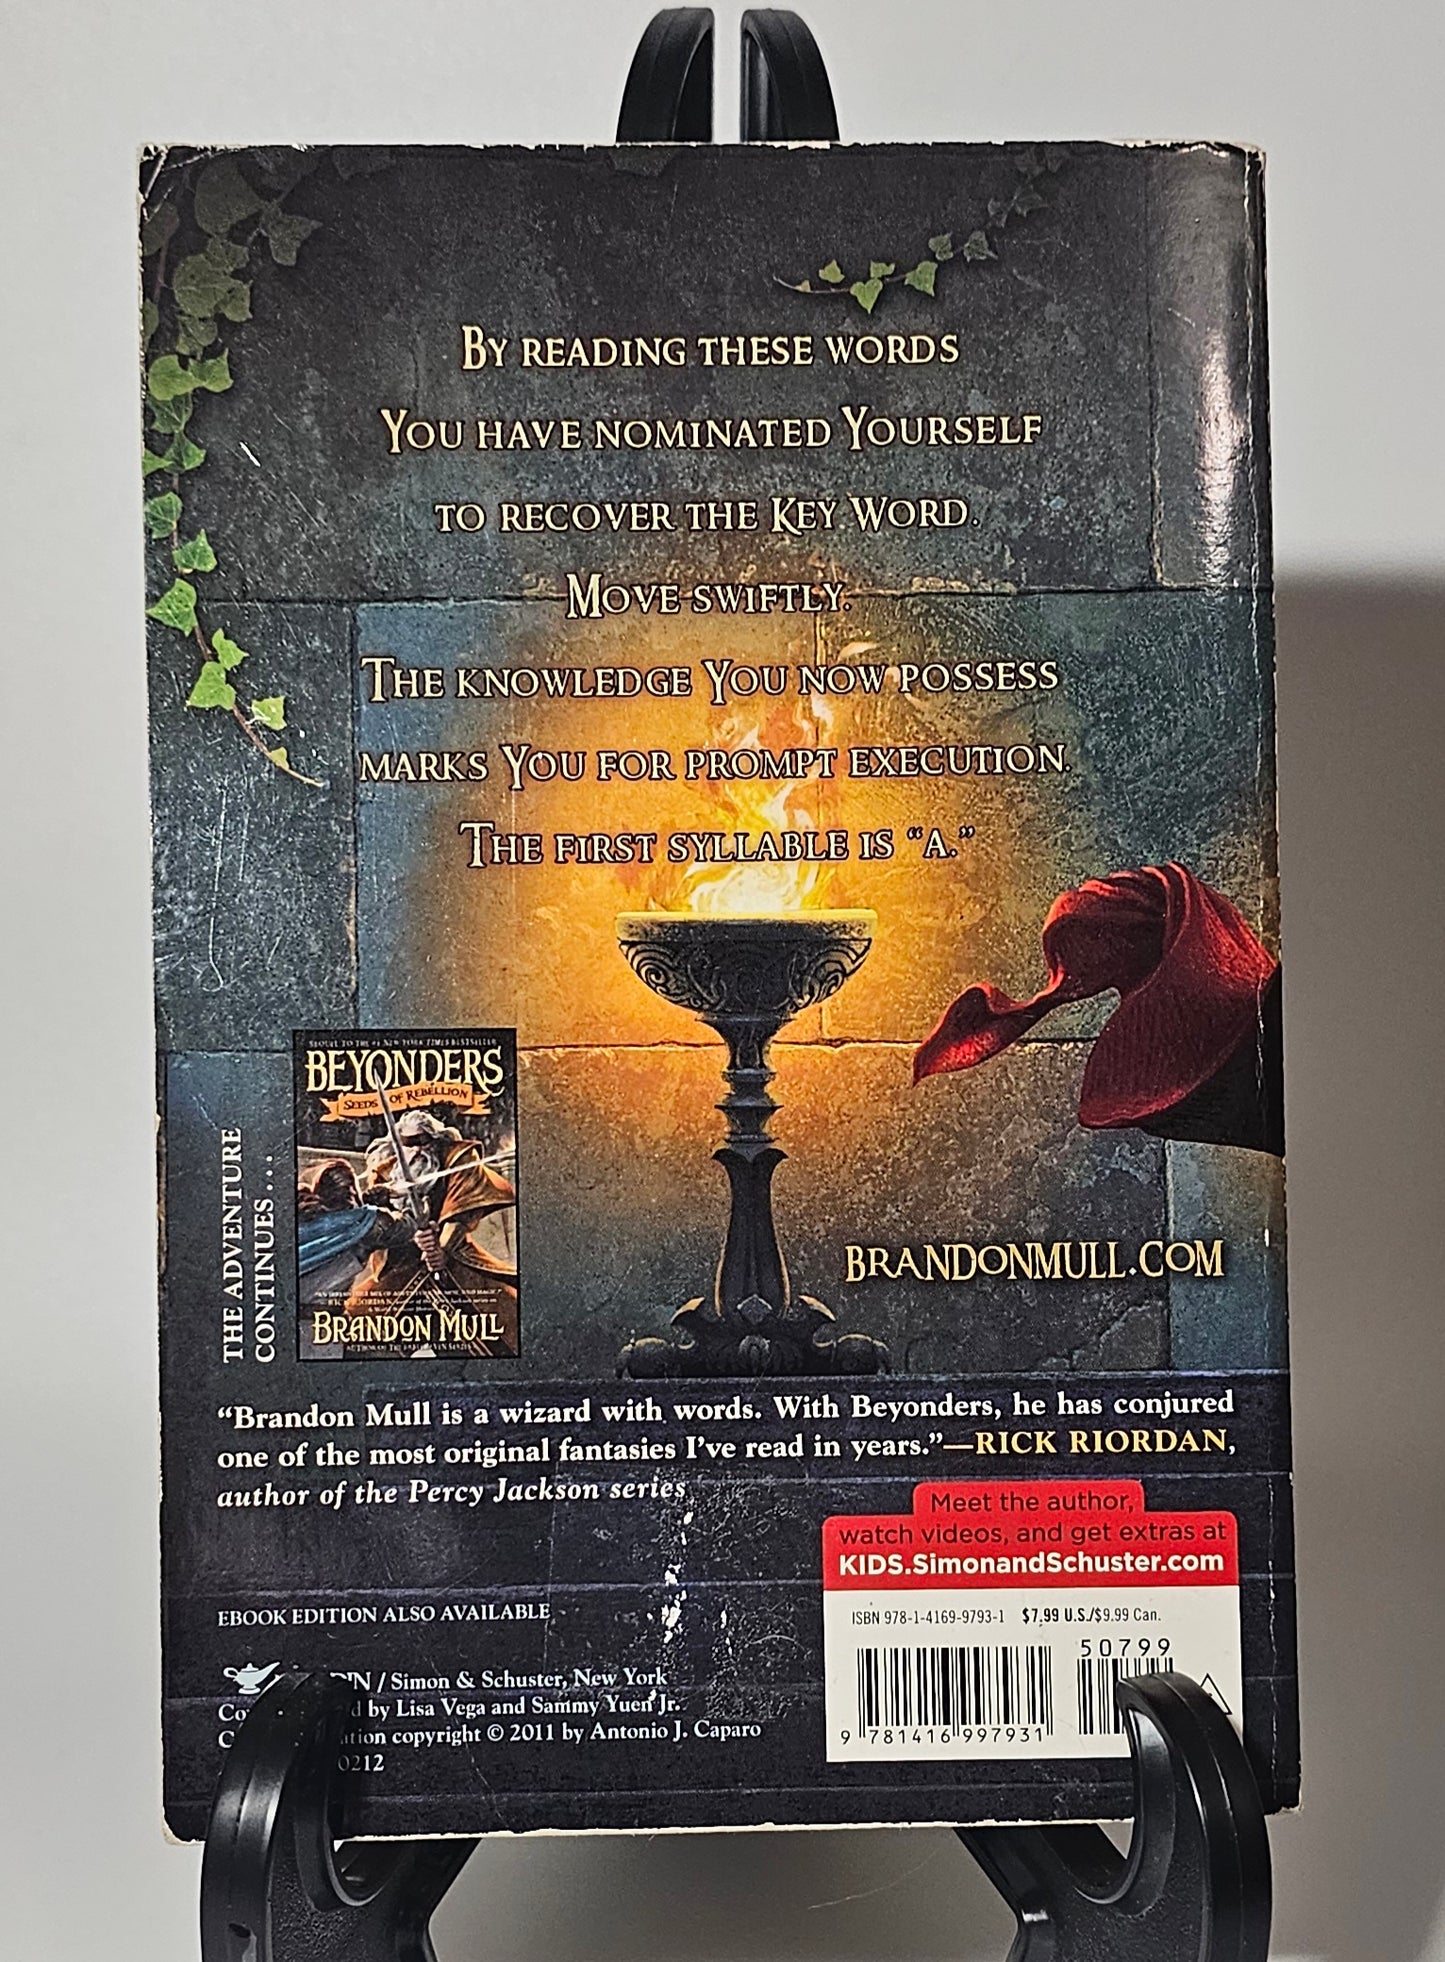 Beyonders A World Without Heroes by Brandon Mull (Beyonders Series #1) - Signed to Jabril